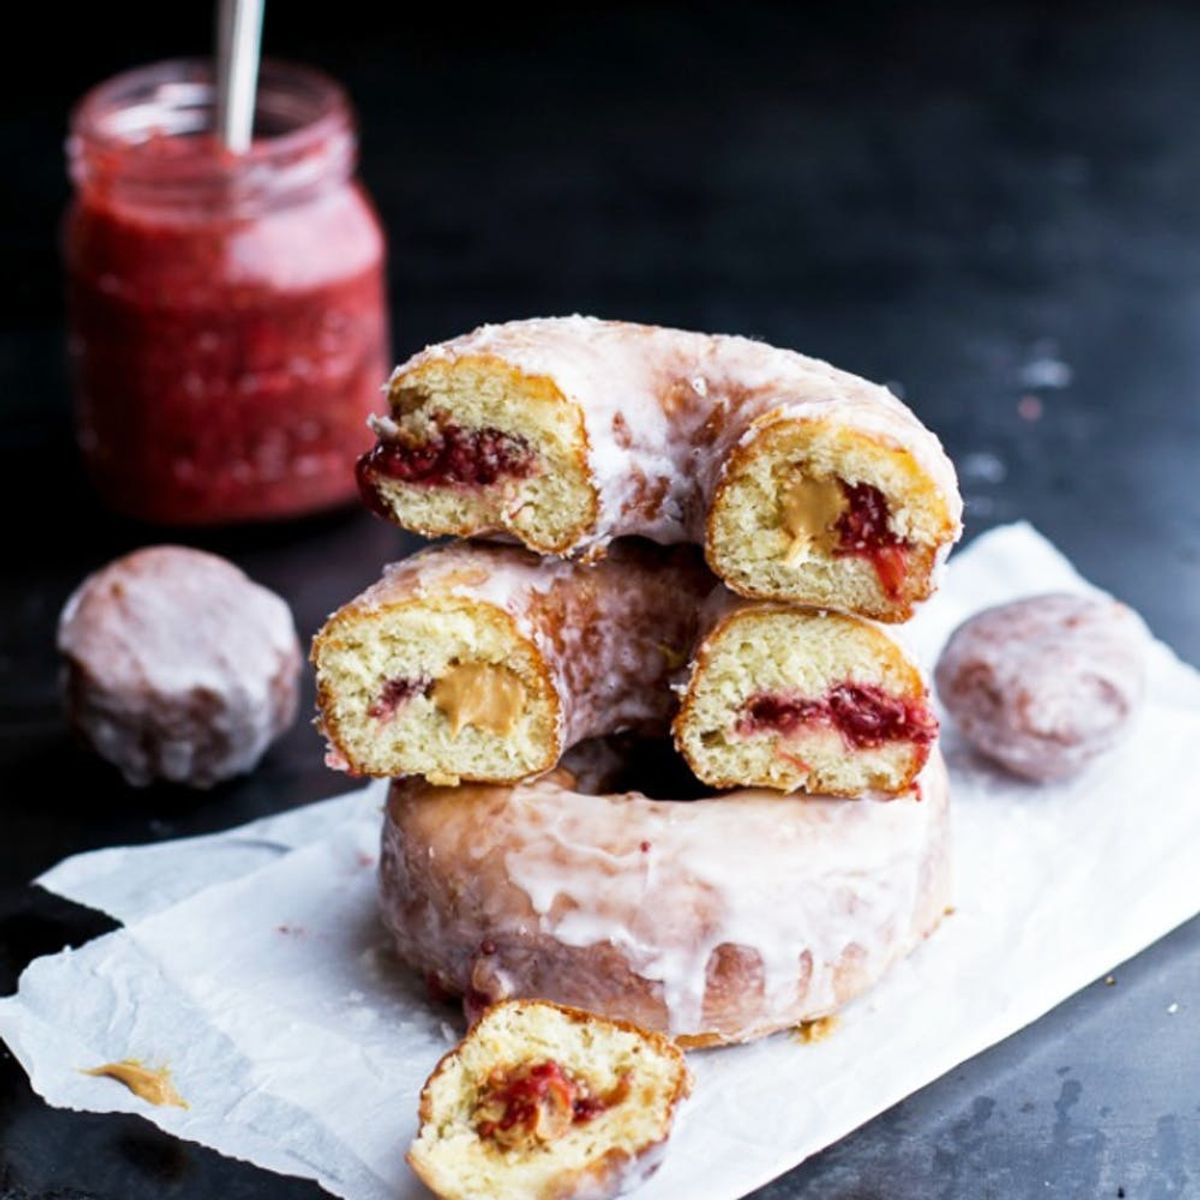 13 Sweet and Gooey Jelly Donut Recipes to Make for Hanukkah